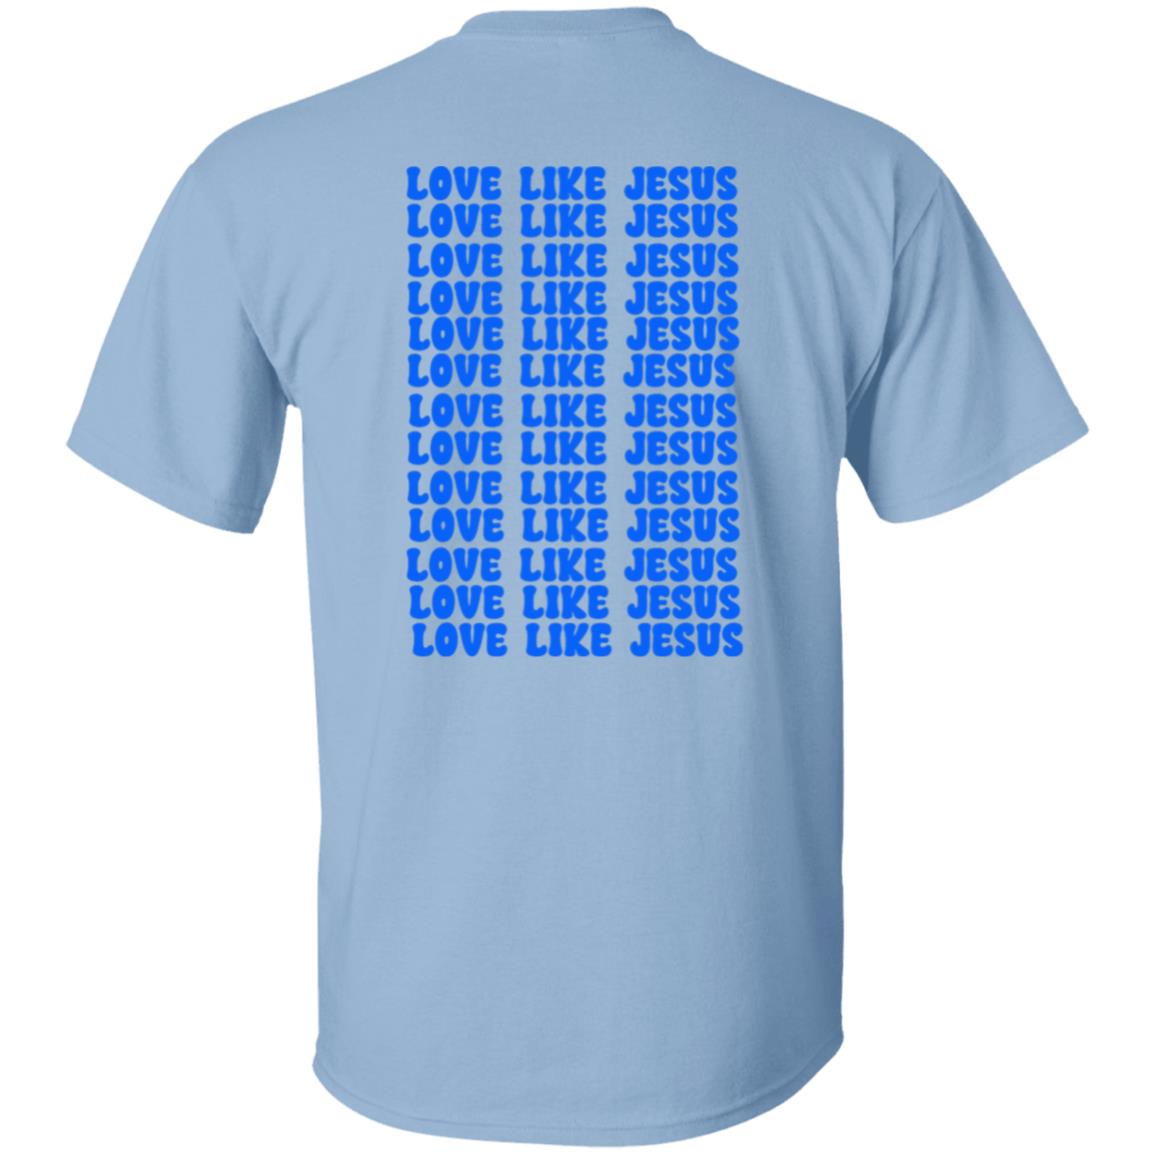 Get trendy with Love Like Jesus (1) Love Like Jesus T-Shirt - T-Shirts available at Good Gift Company. Grab yours for $18.95 today!